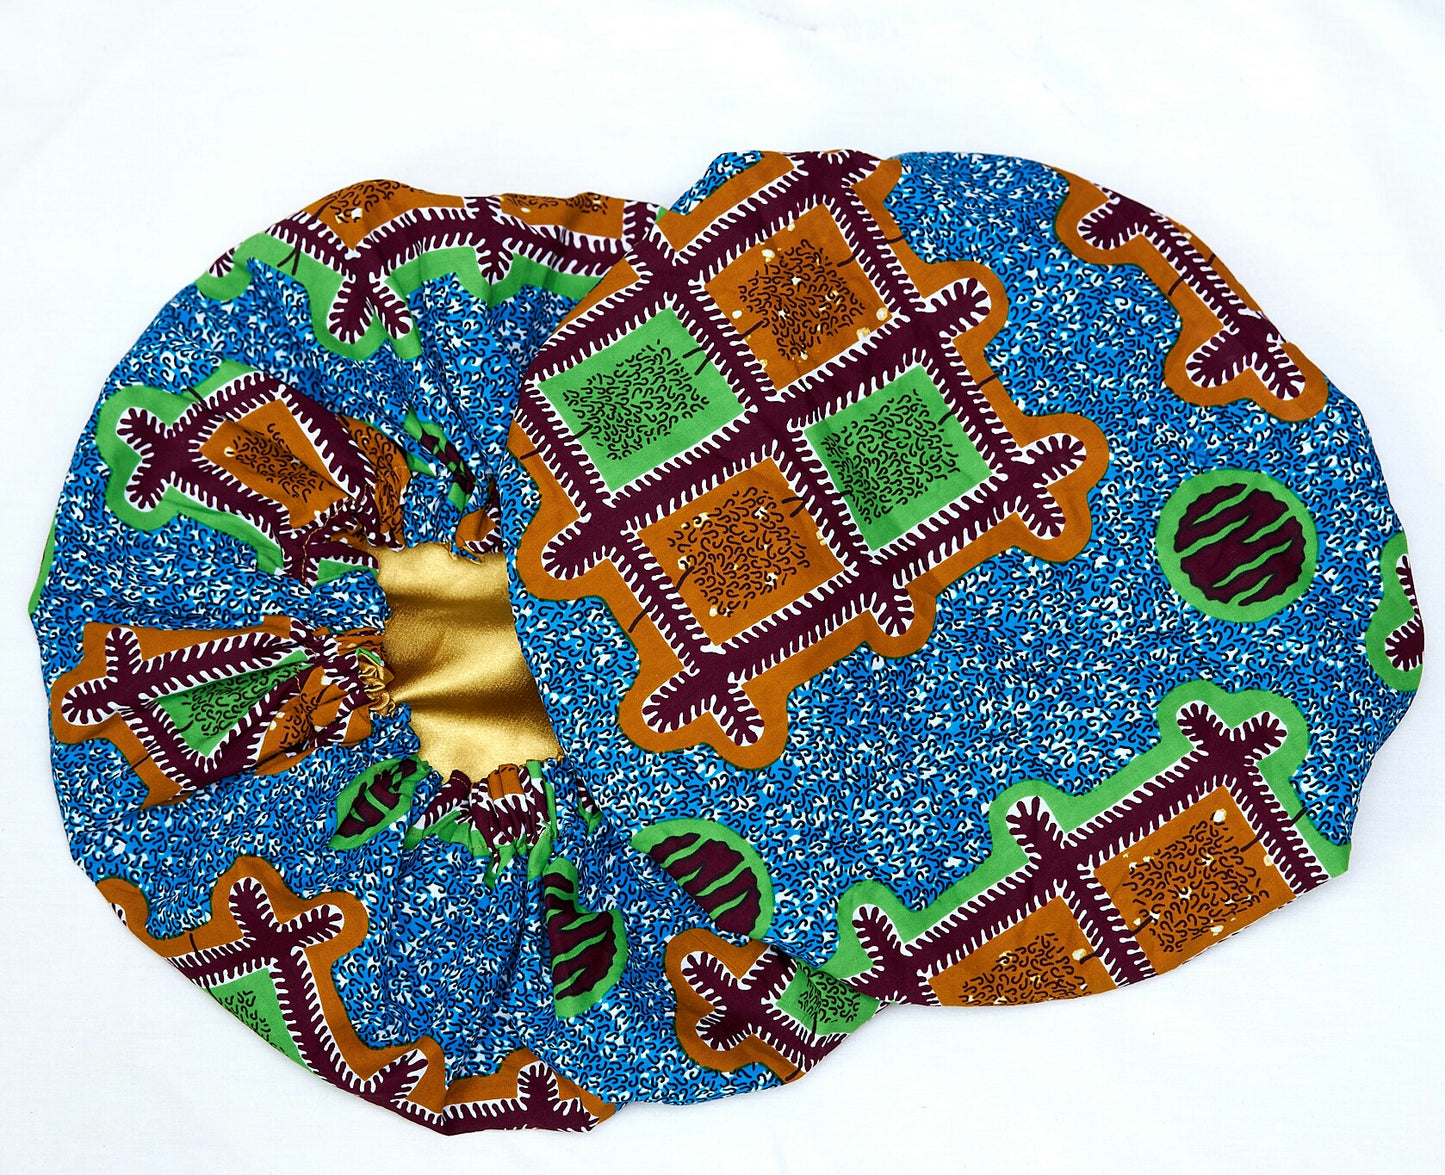 An Ankara Wax Print Made of Seablue, Green, Brown and White Blended Beautiful Colours And Pattern, Hand Made Elastic Silklined Bonnet With Band